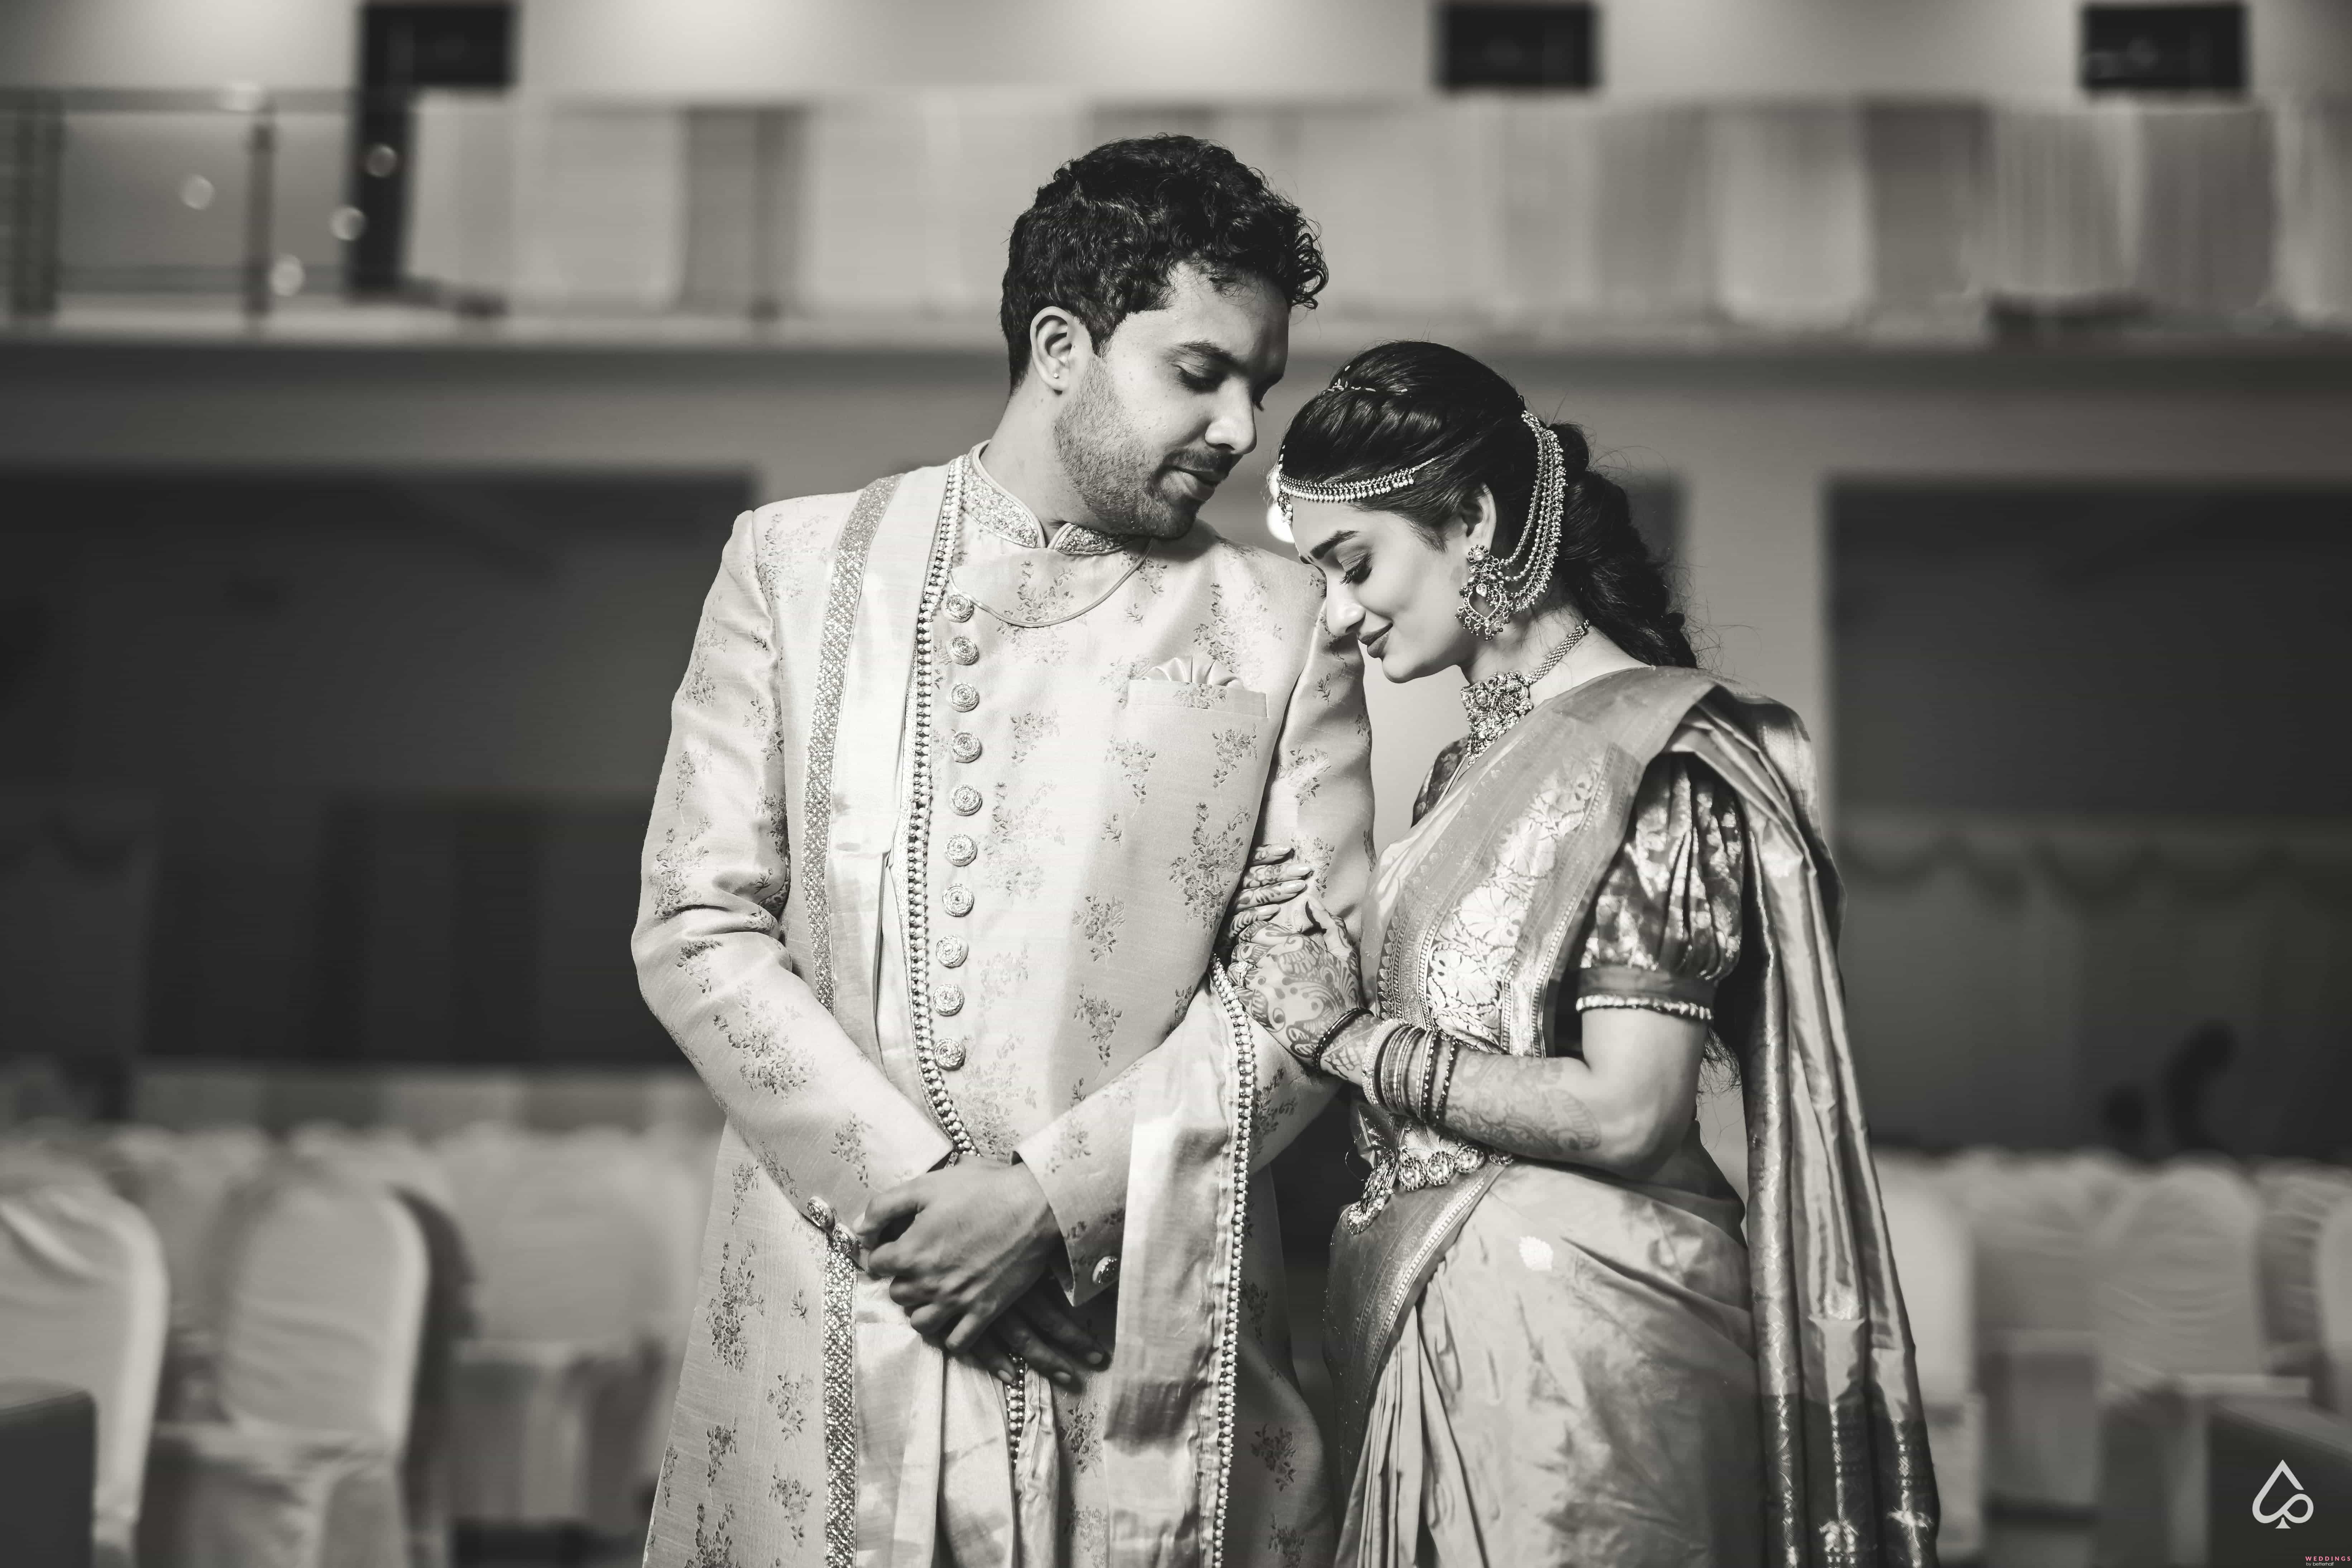 Couple Photoshoot Poses in Saree for Eternal Elegance